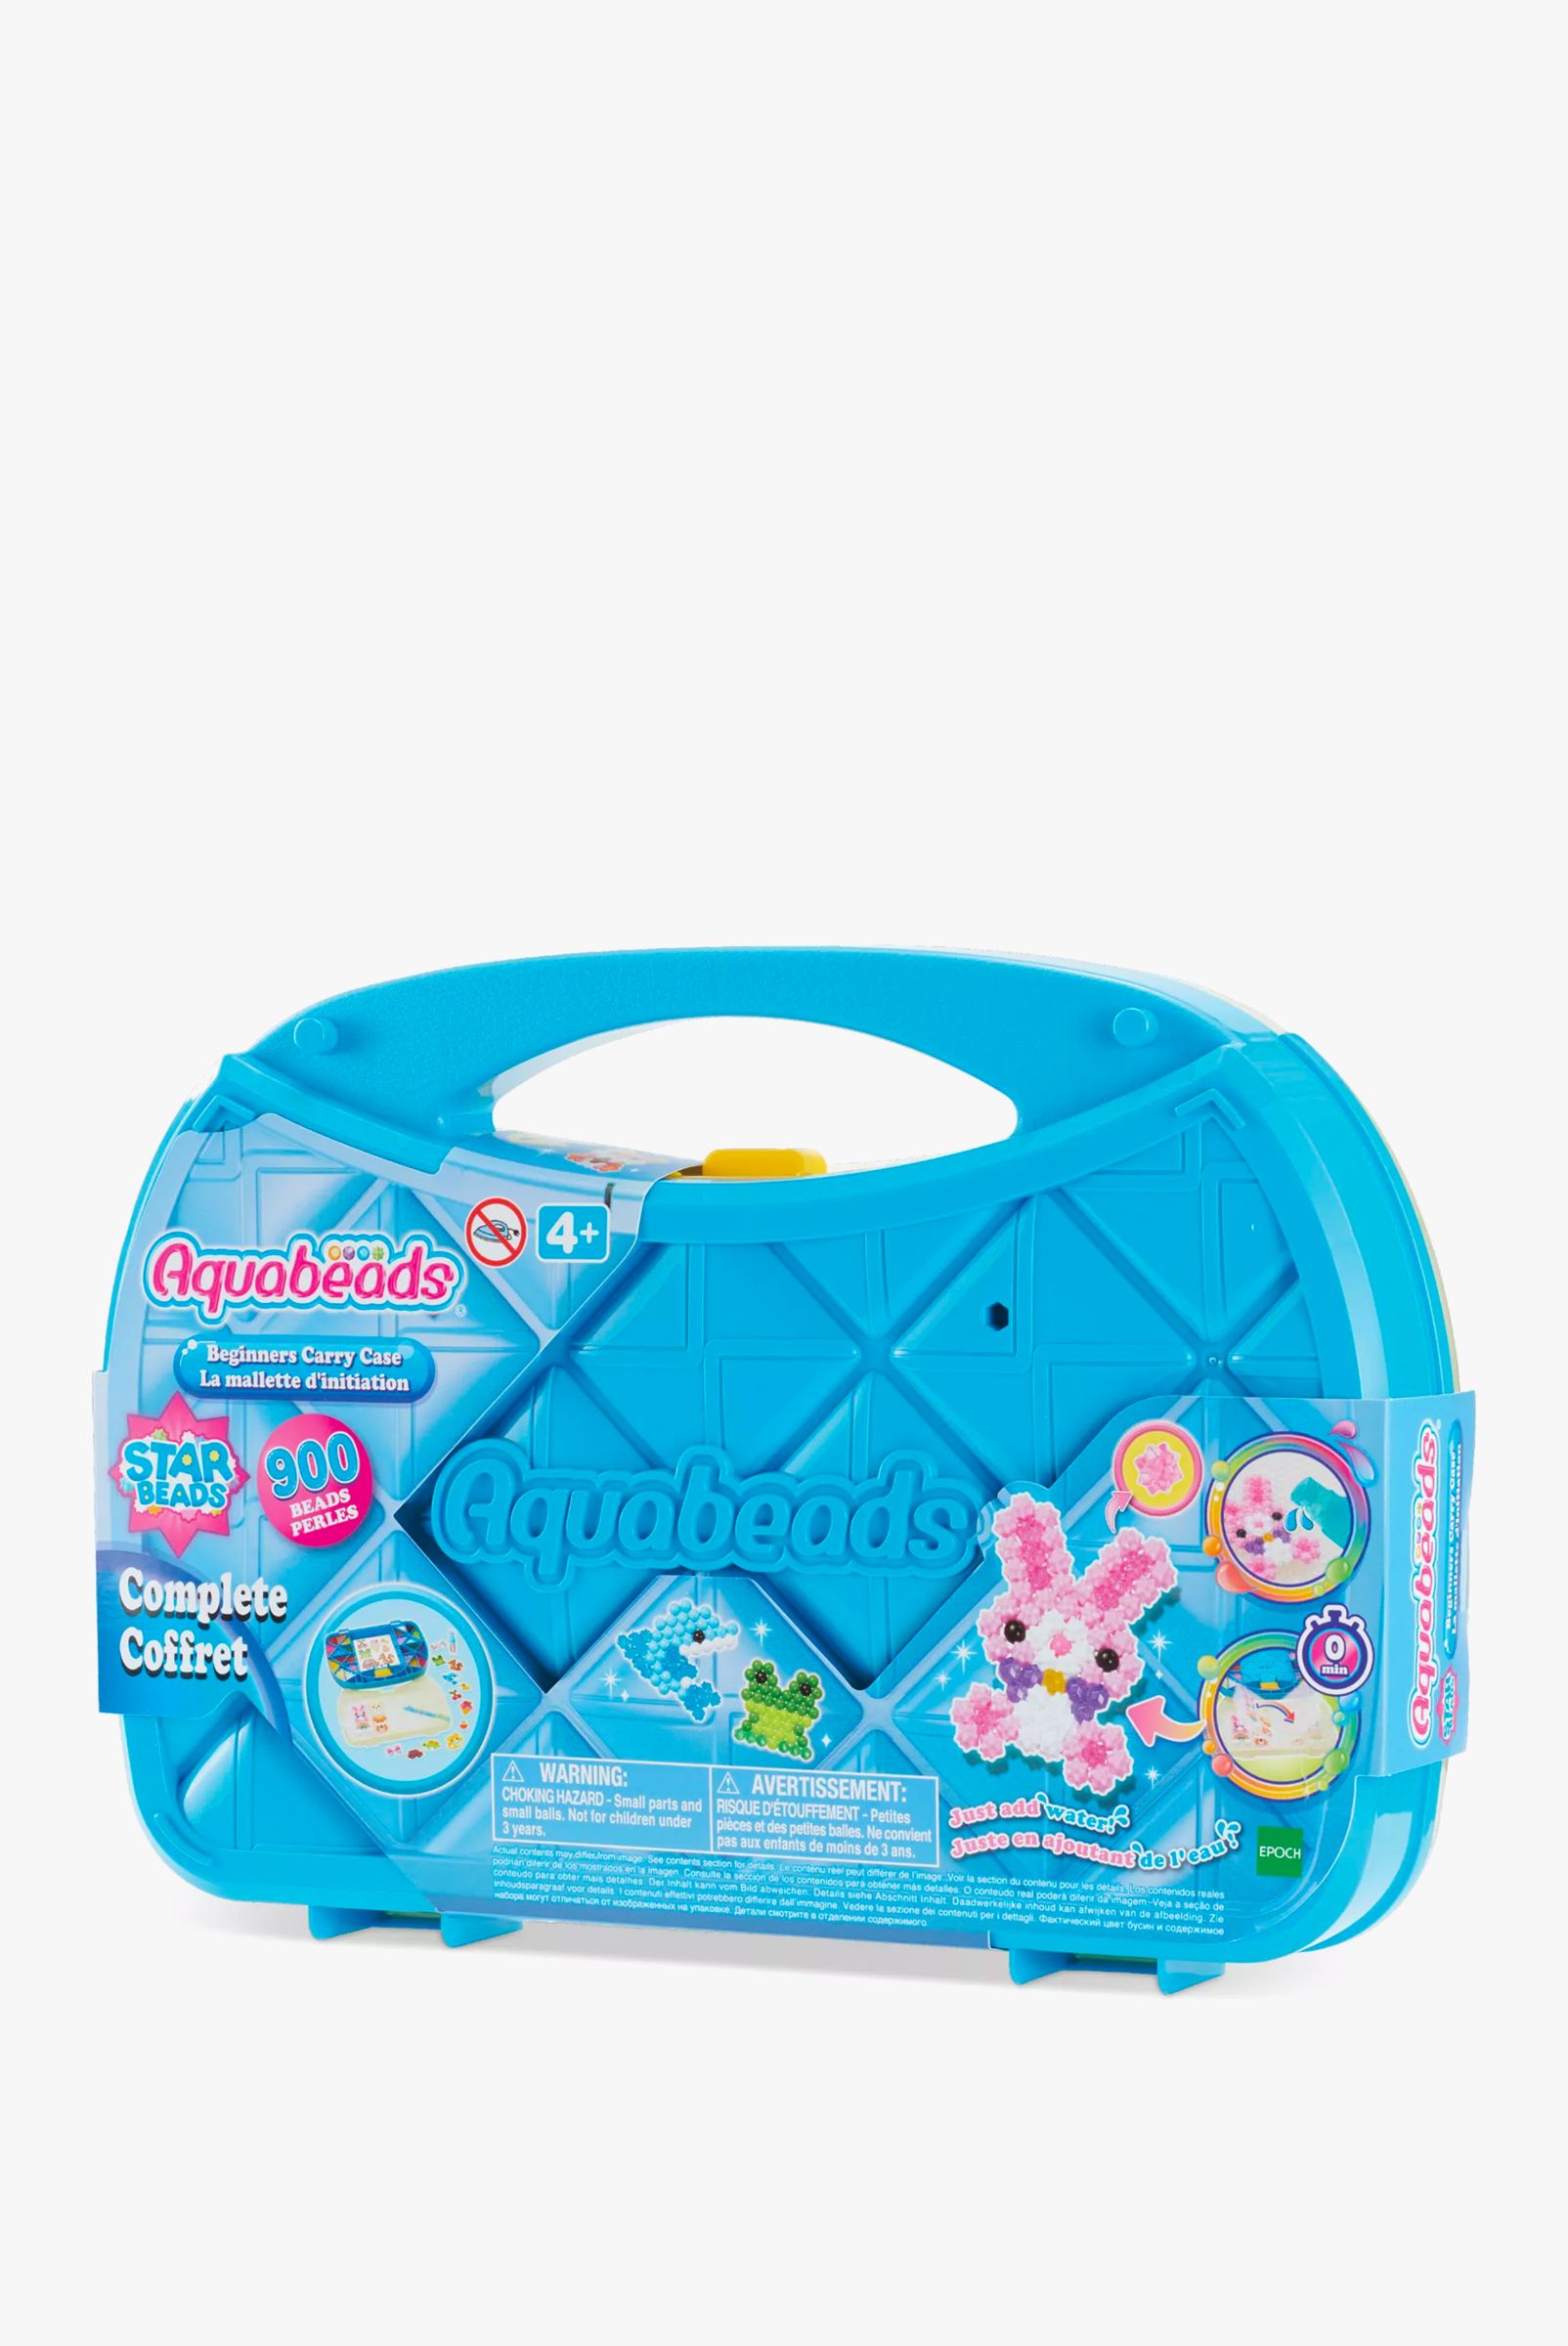 Aquabeads Beginners Carry Case, £17.99